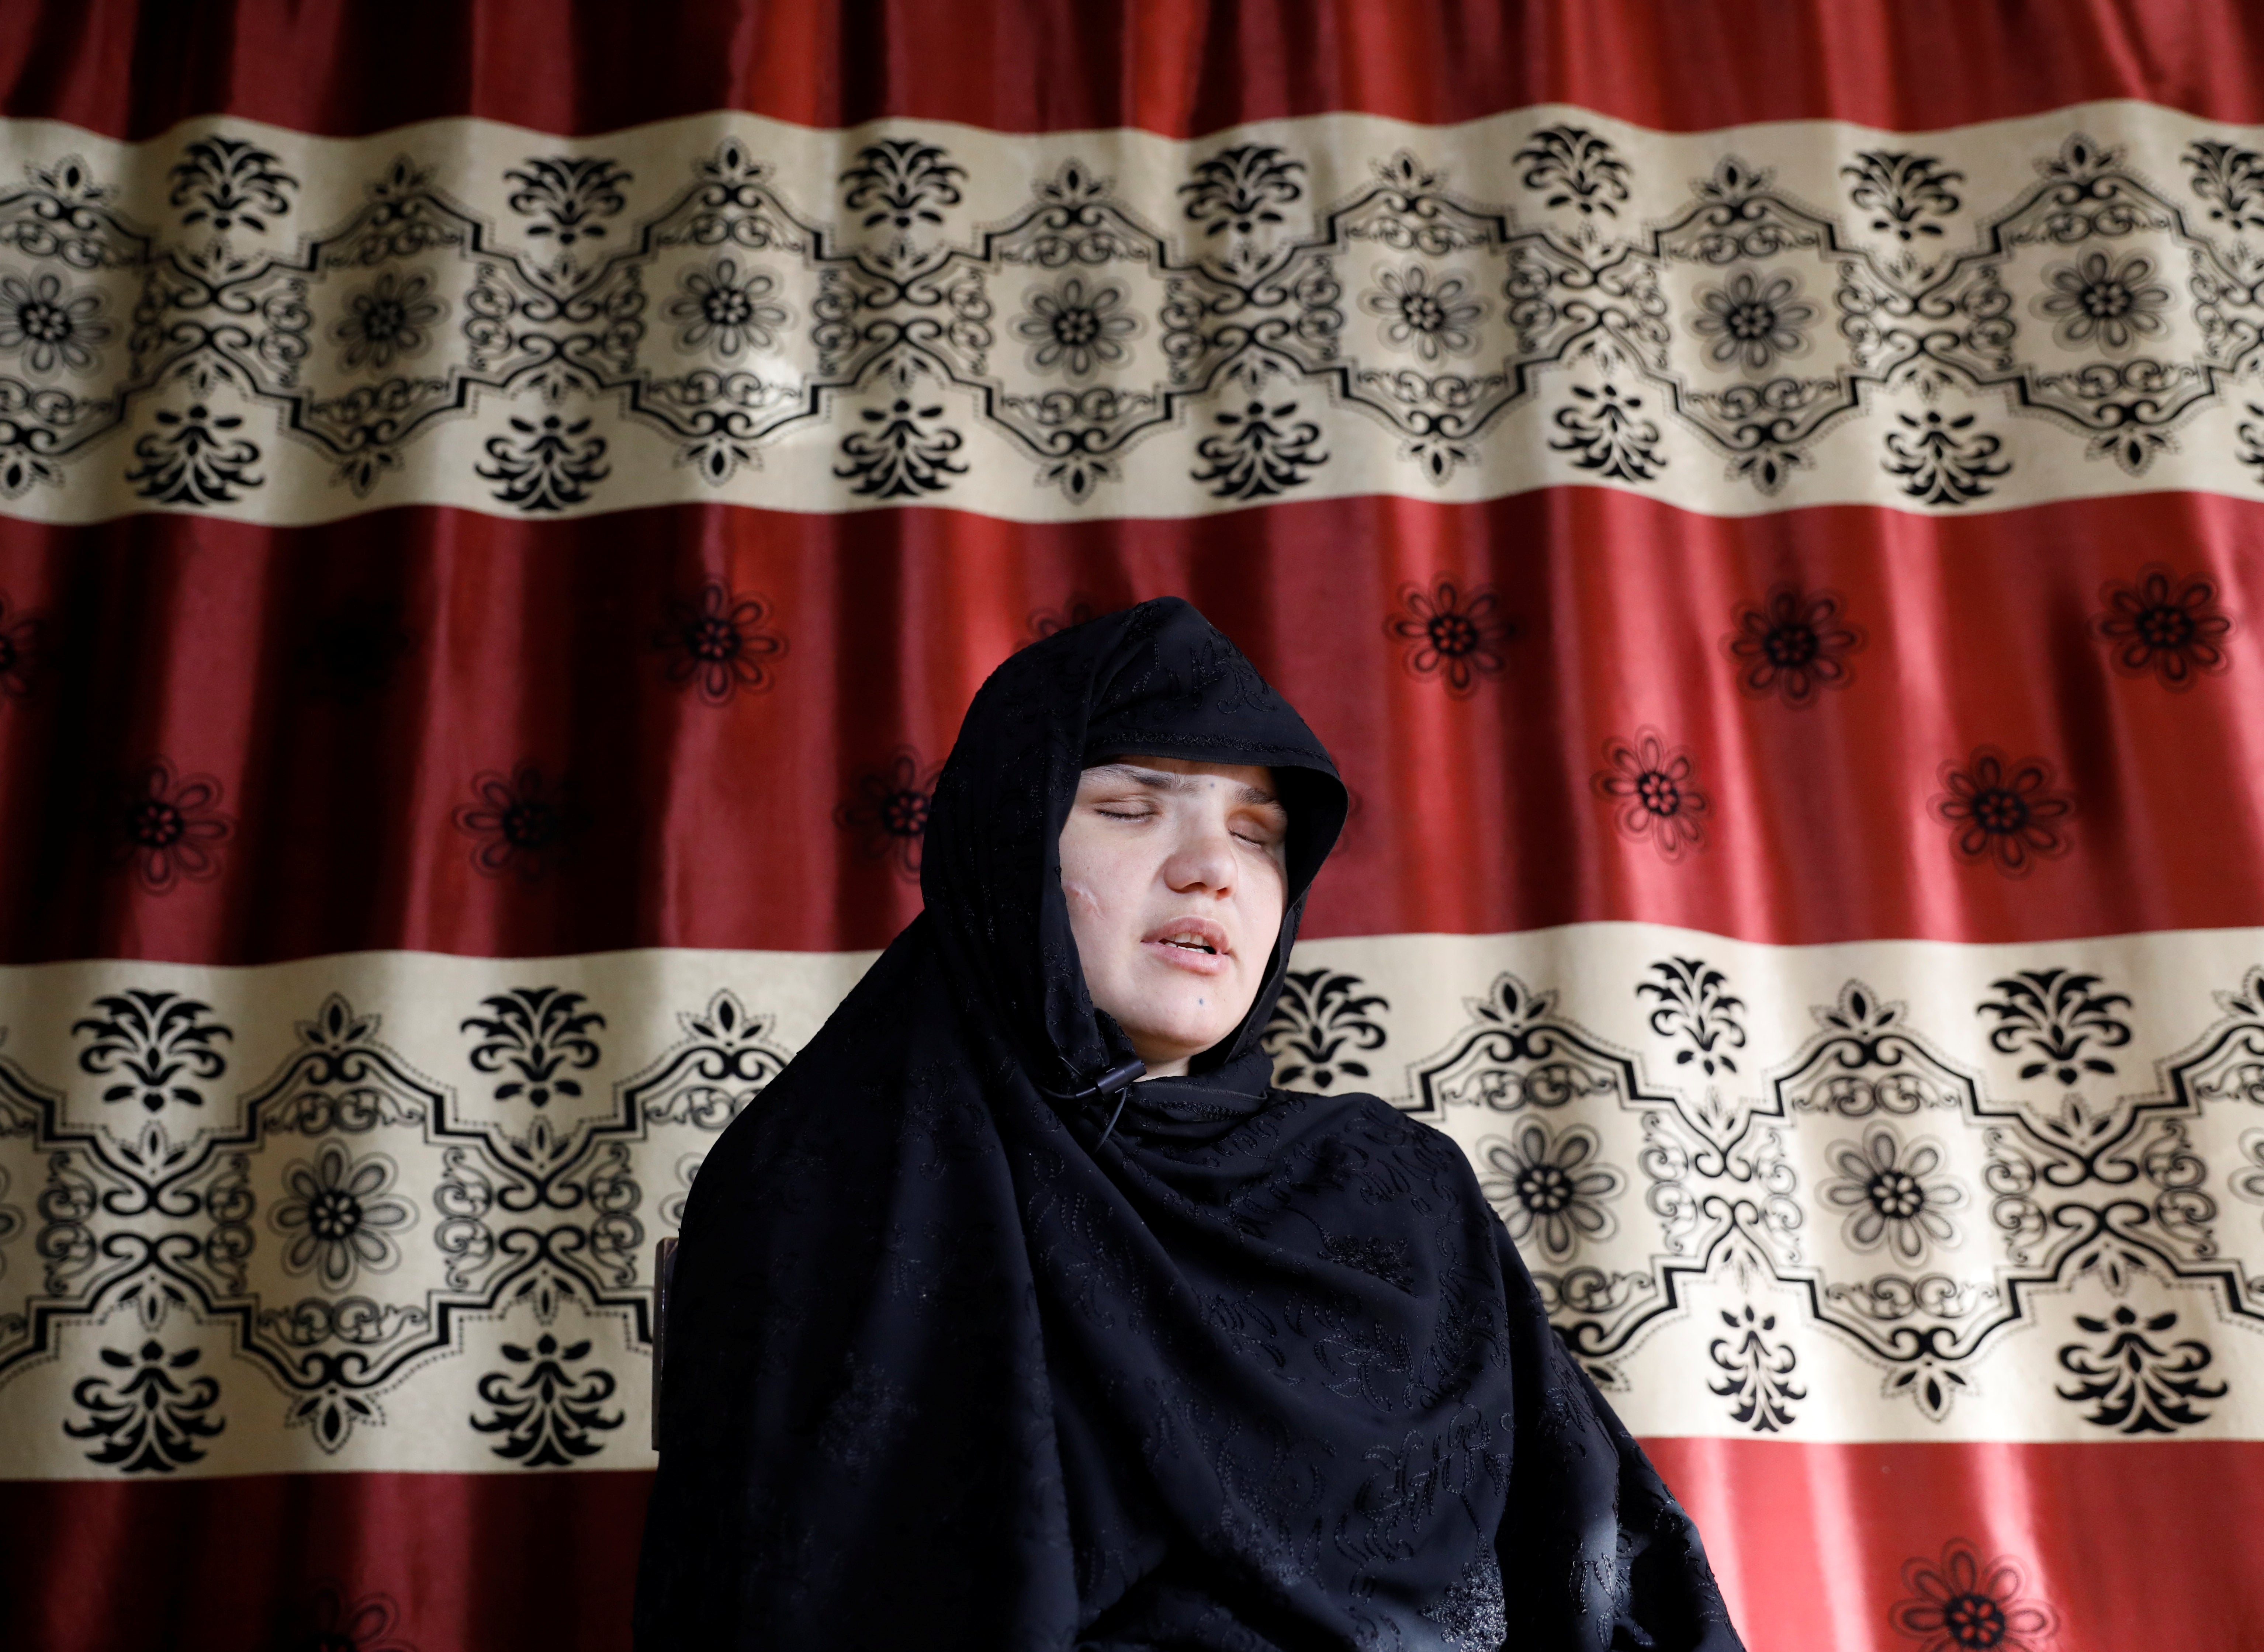 Khatera, 33, was blinded in an attack by gunmen in Ghazni province, Afghanistan.